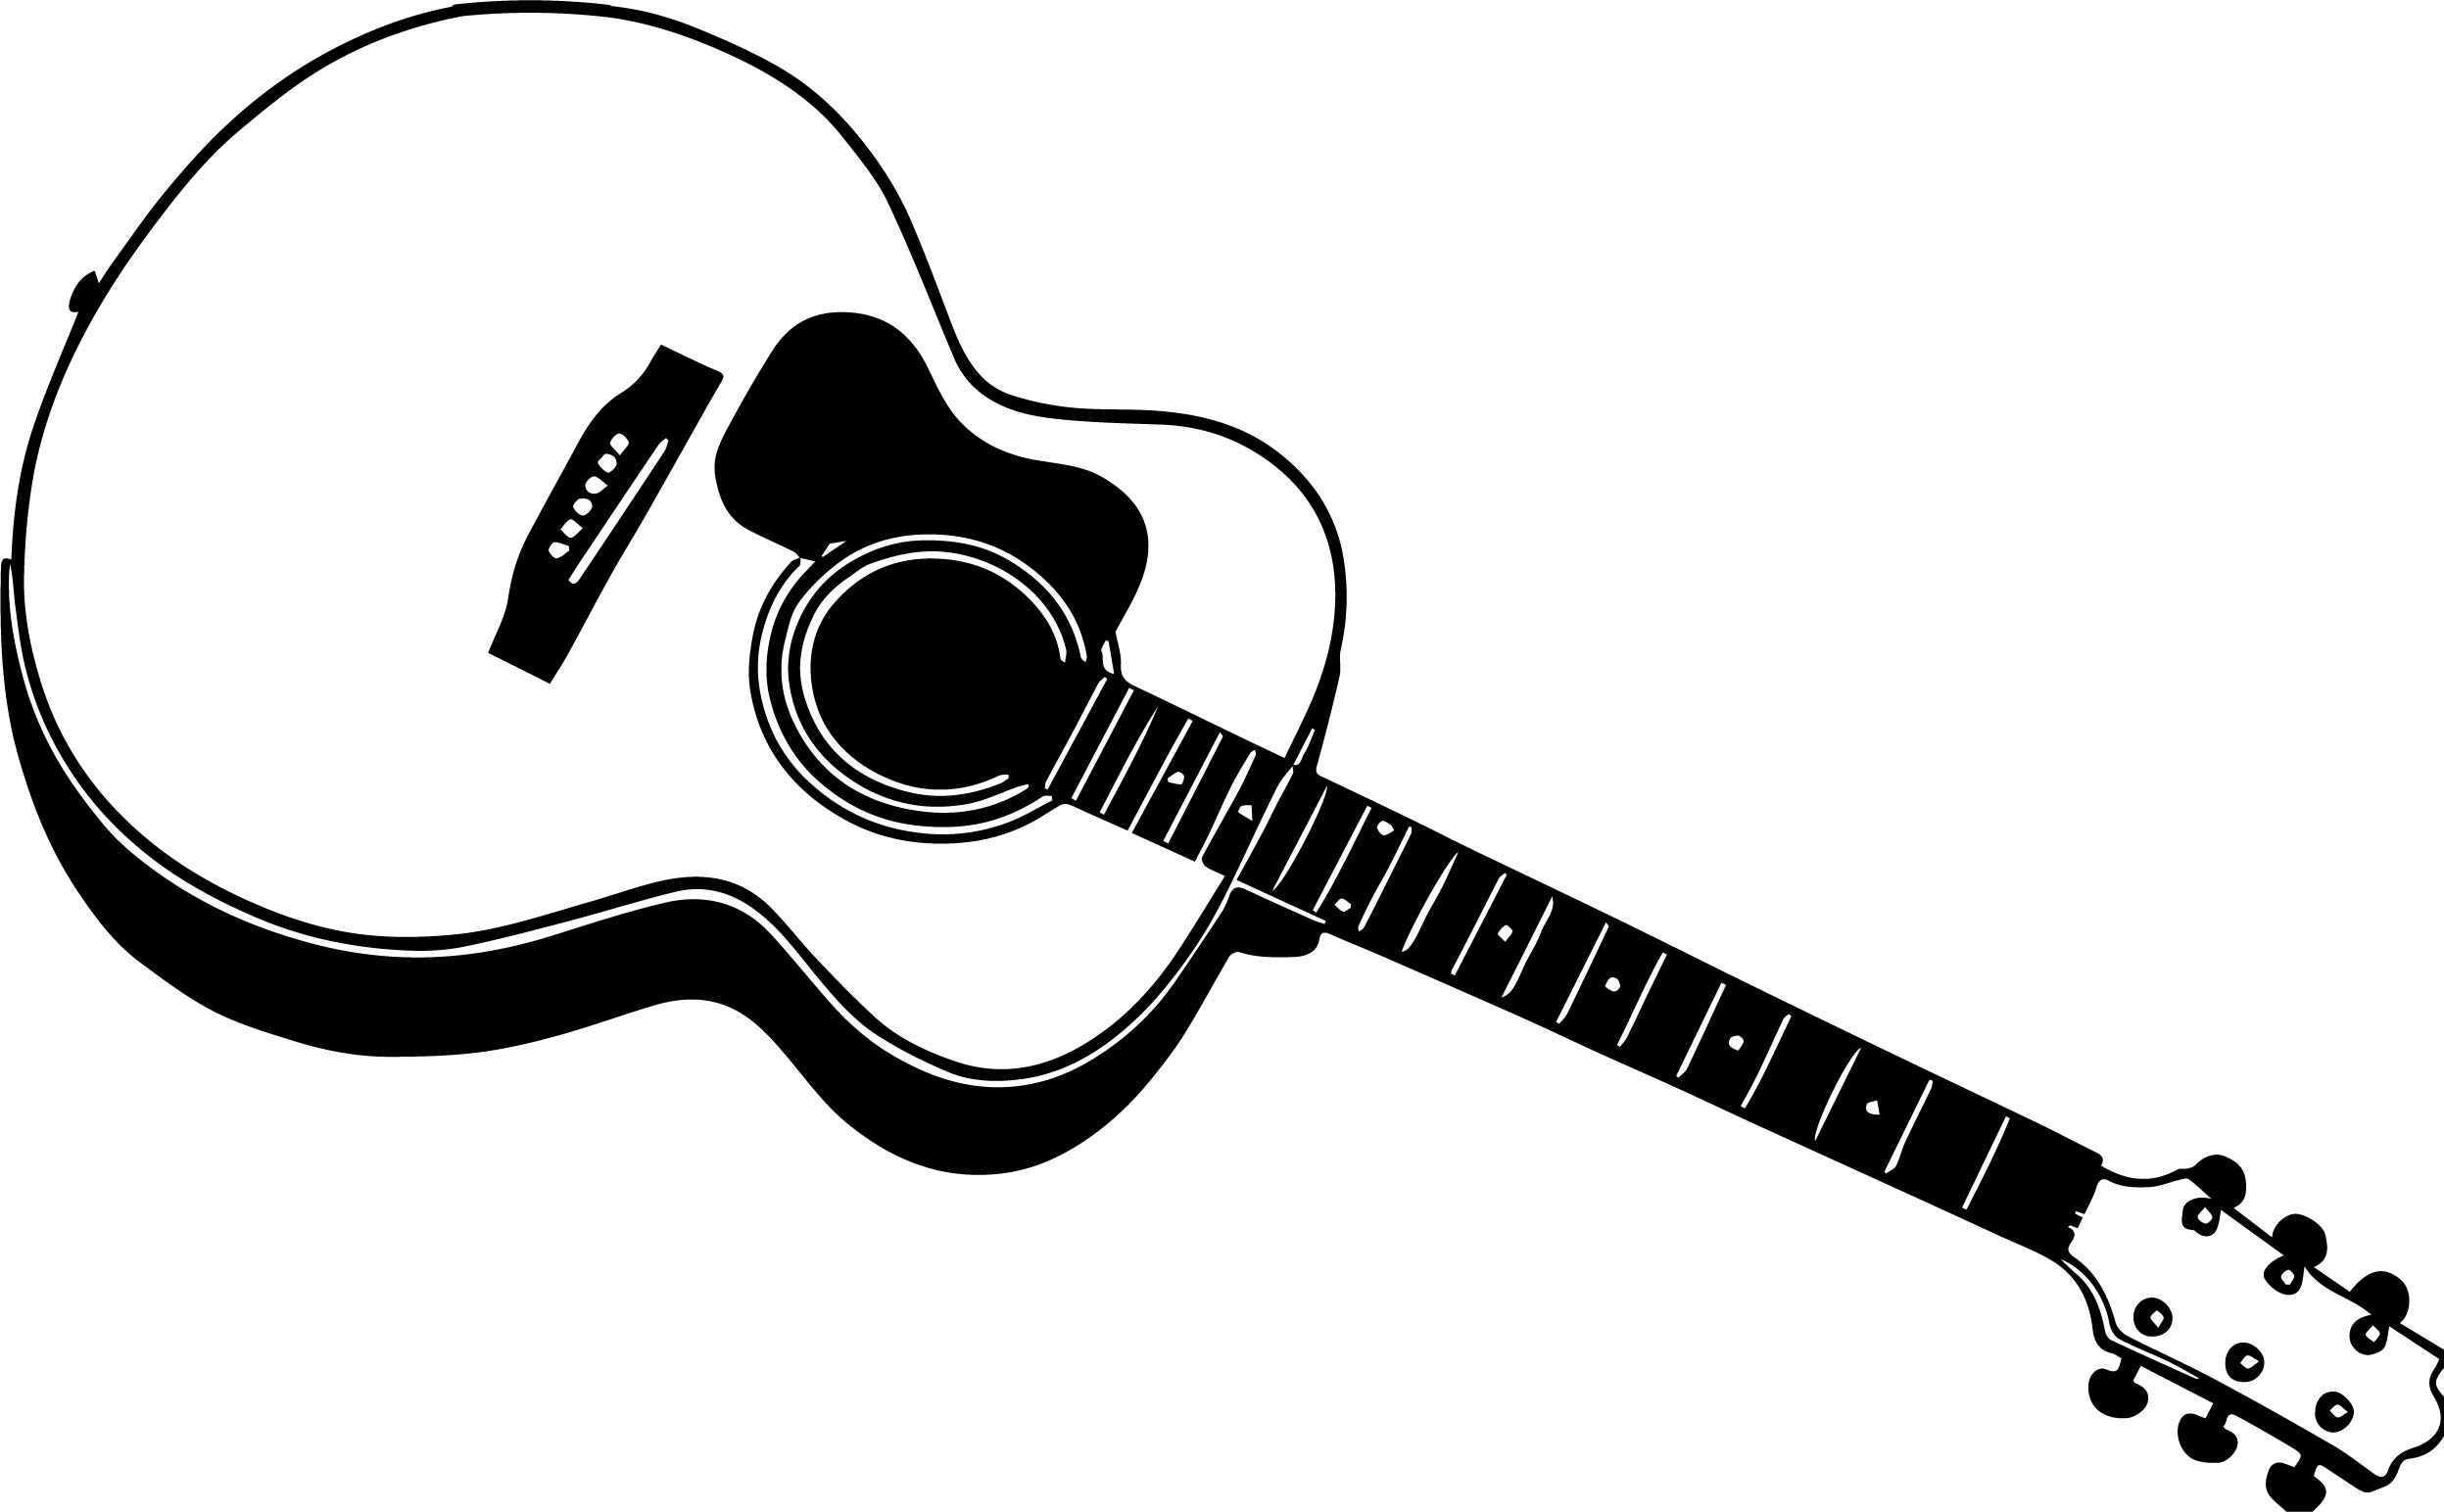 Download 30 Guitar Coloring Pages ColoringStar - Coloring Pages